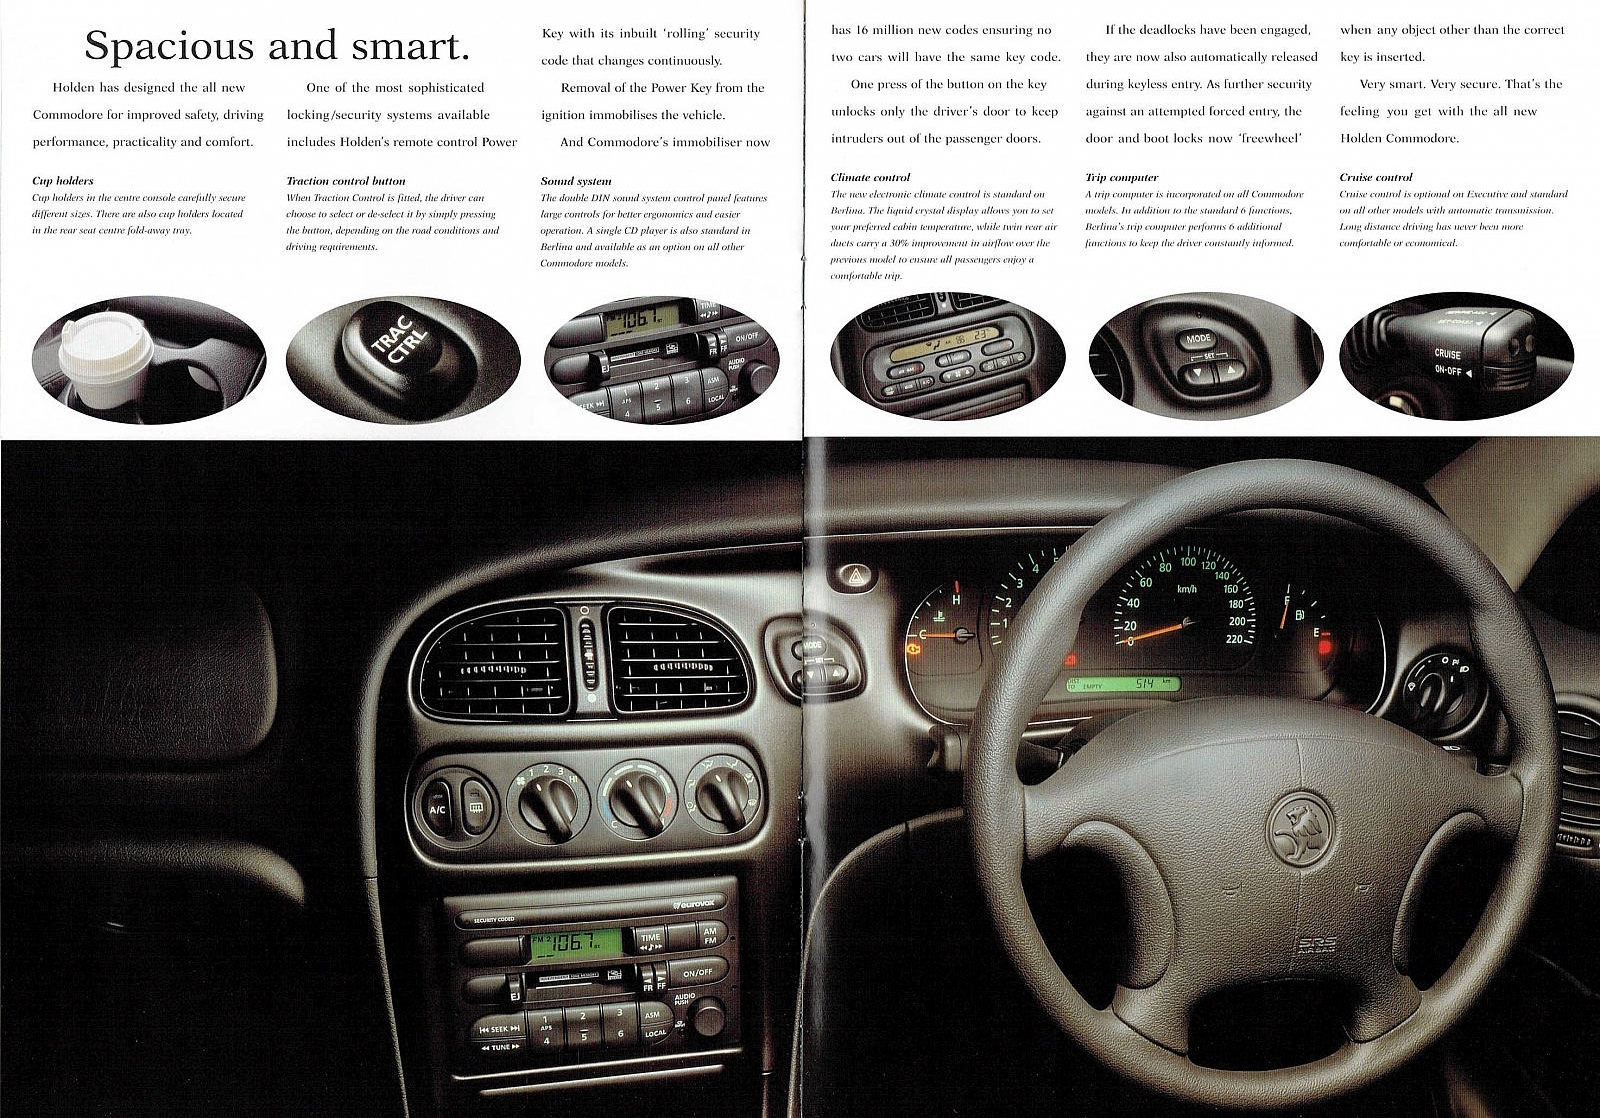 1997 Holden VT Commodore Brochure Page 12